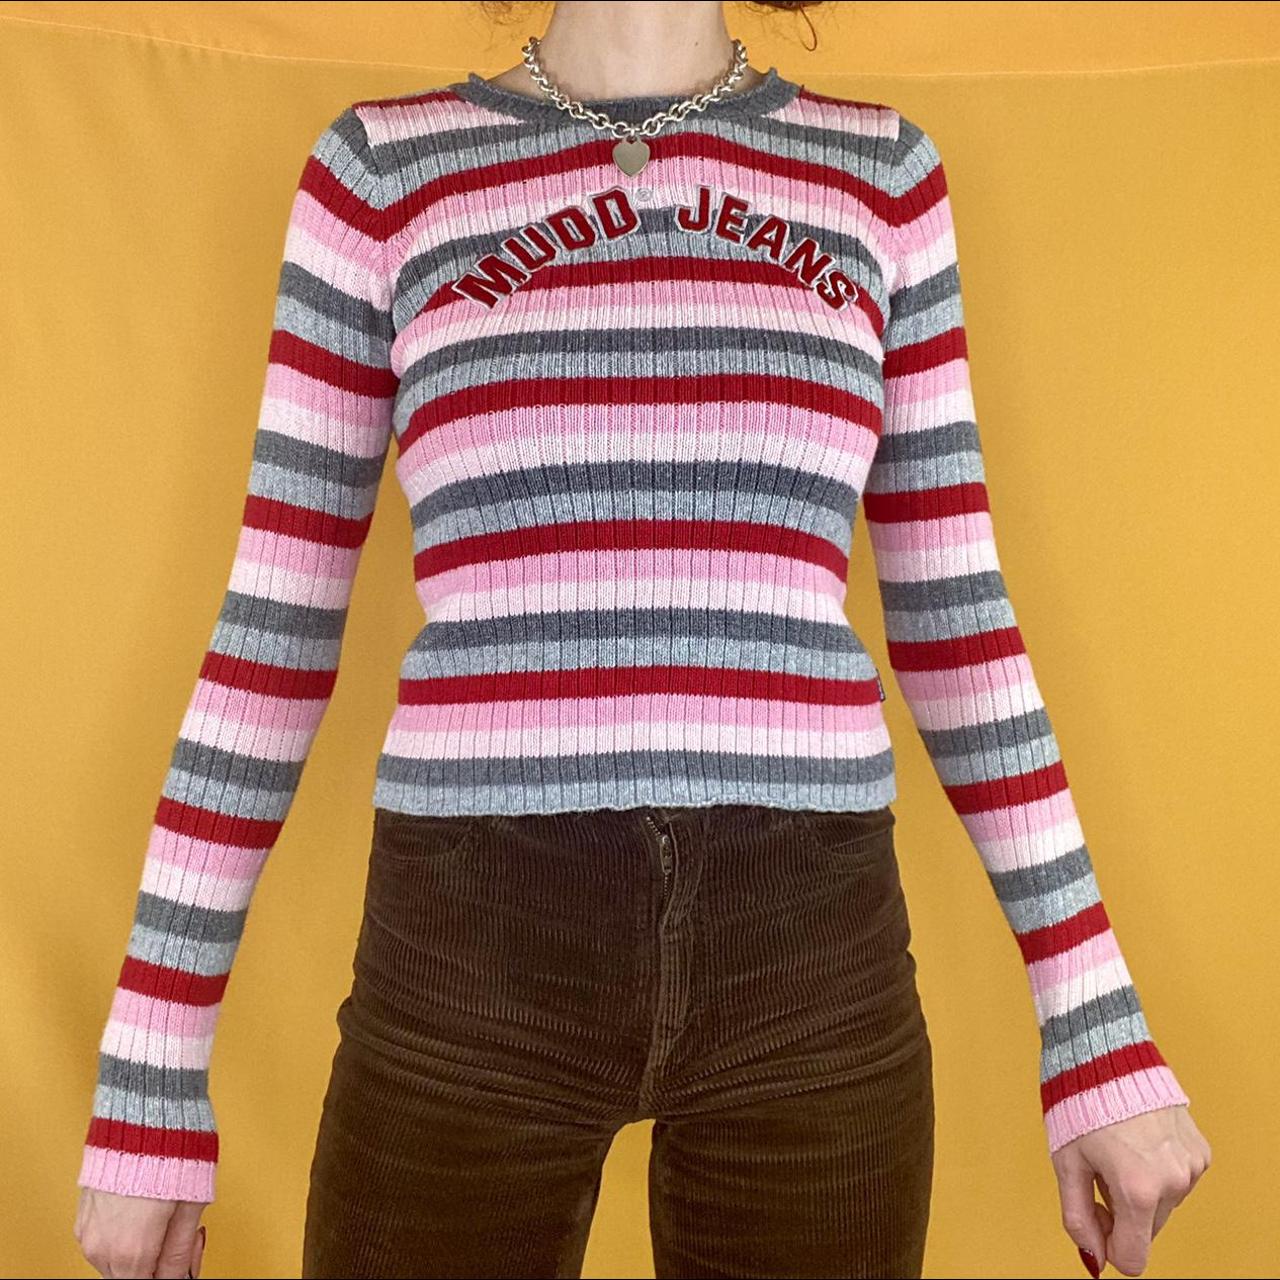 Product Image 1 - VINTAGE MUDD JEANS SWEATER!
multi colored